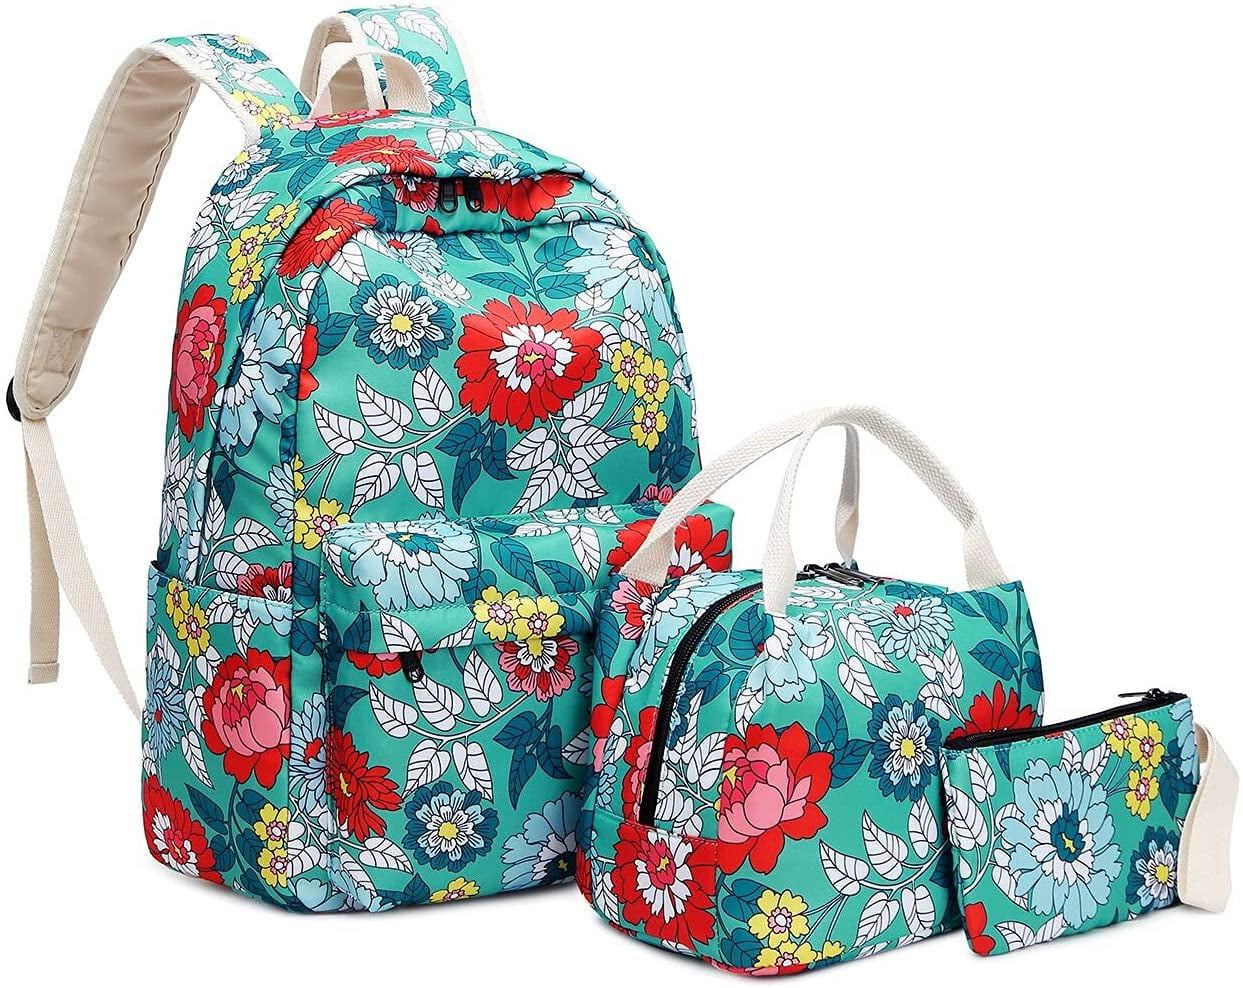 Casual School Backpack Coral and Green Floral Print Laptop Rucksack Multi-Functional Daypack Book Satchel